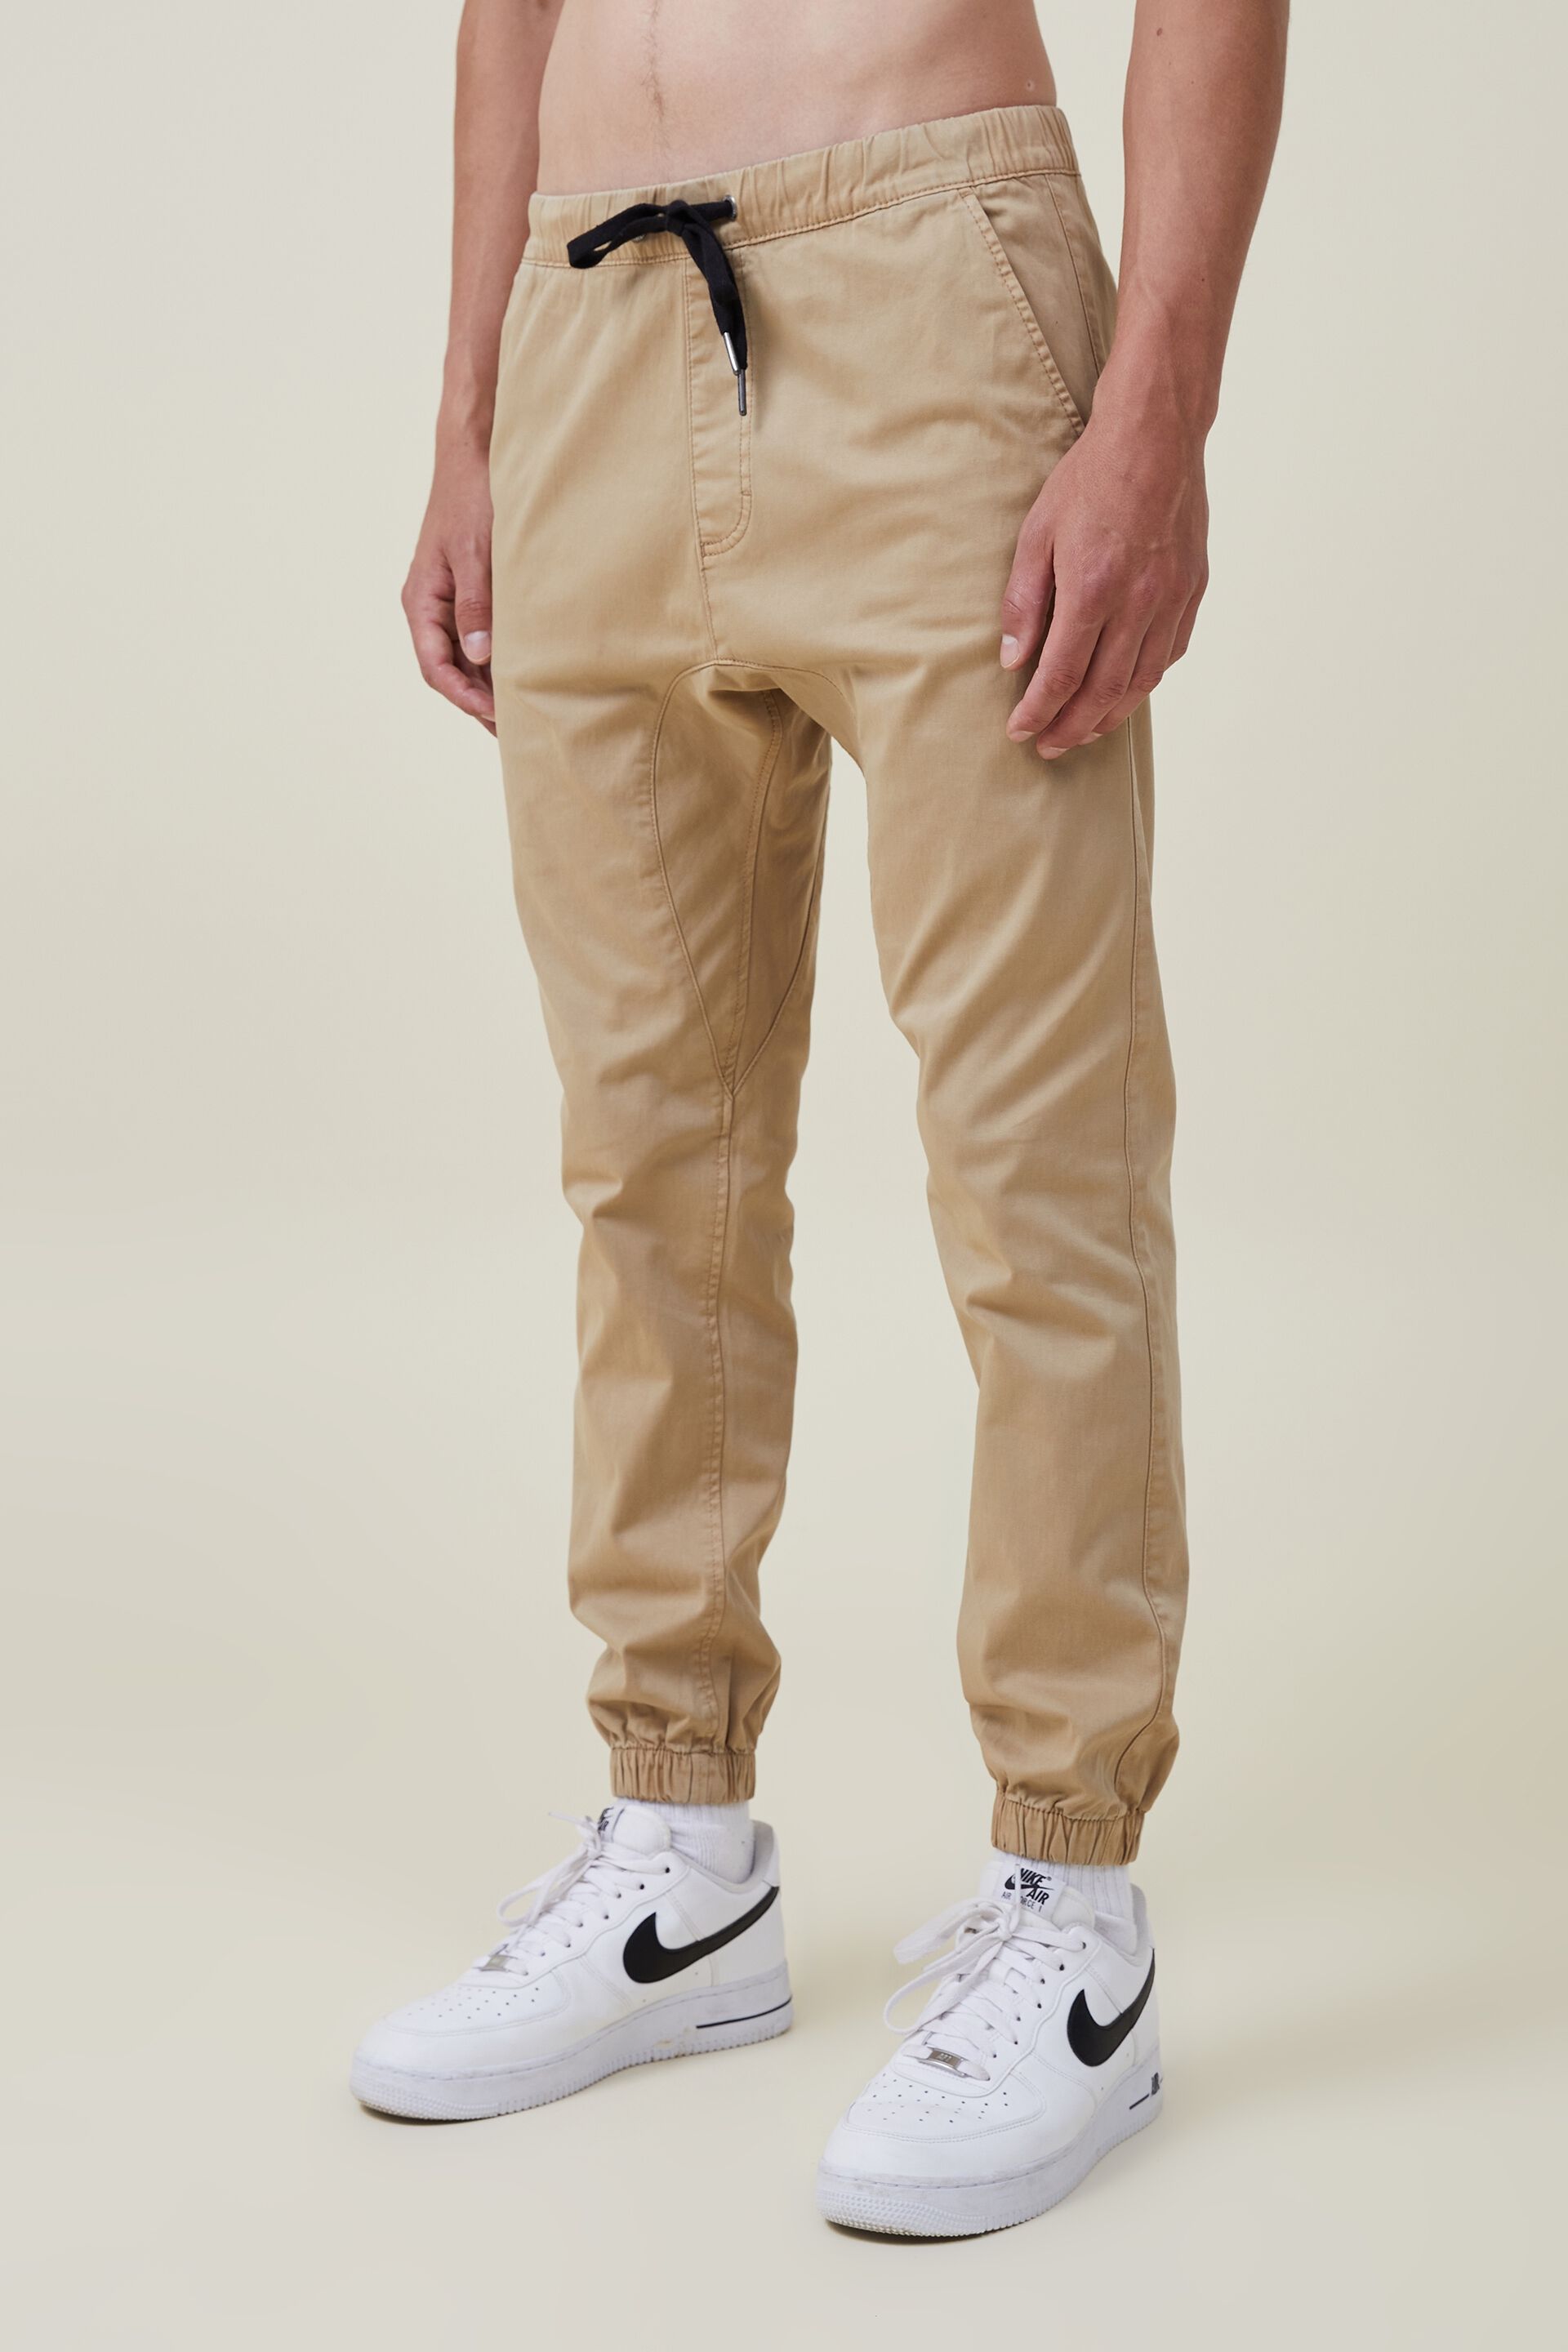 Campus Sutra Men's Maroon Cuffed Hem Cargo Trousers - Campussutra